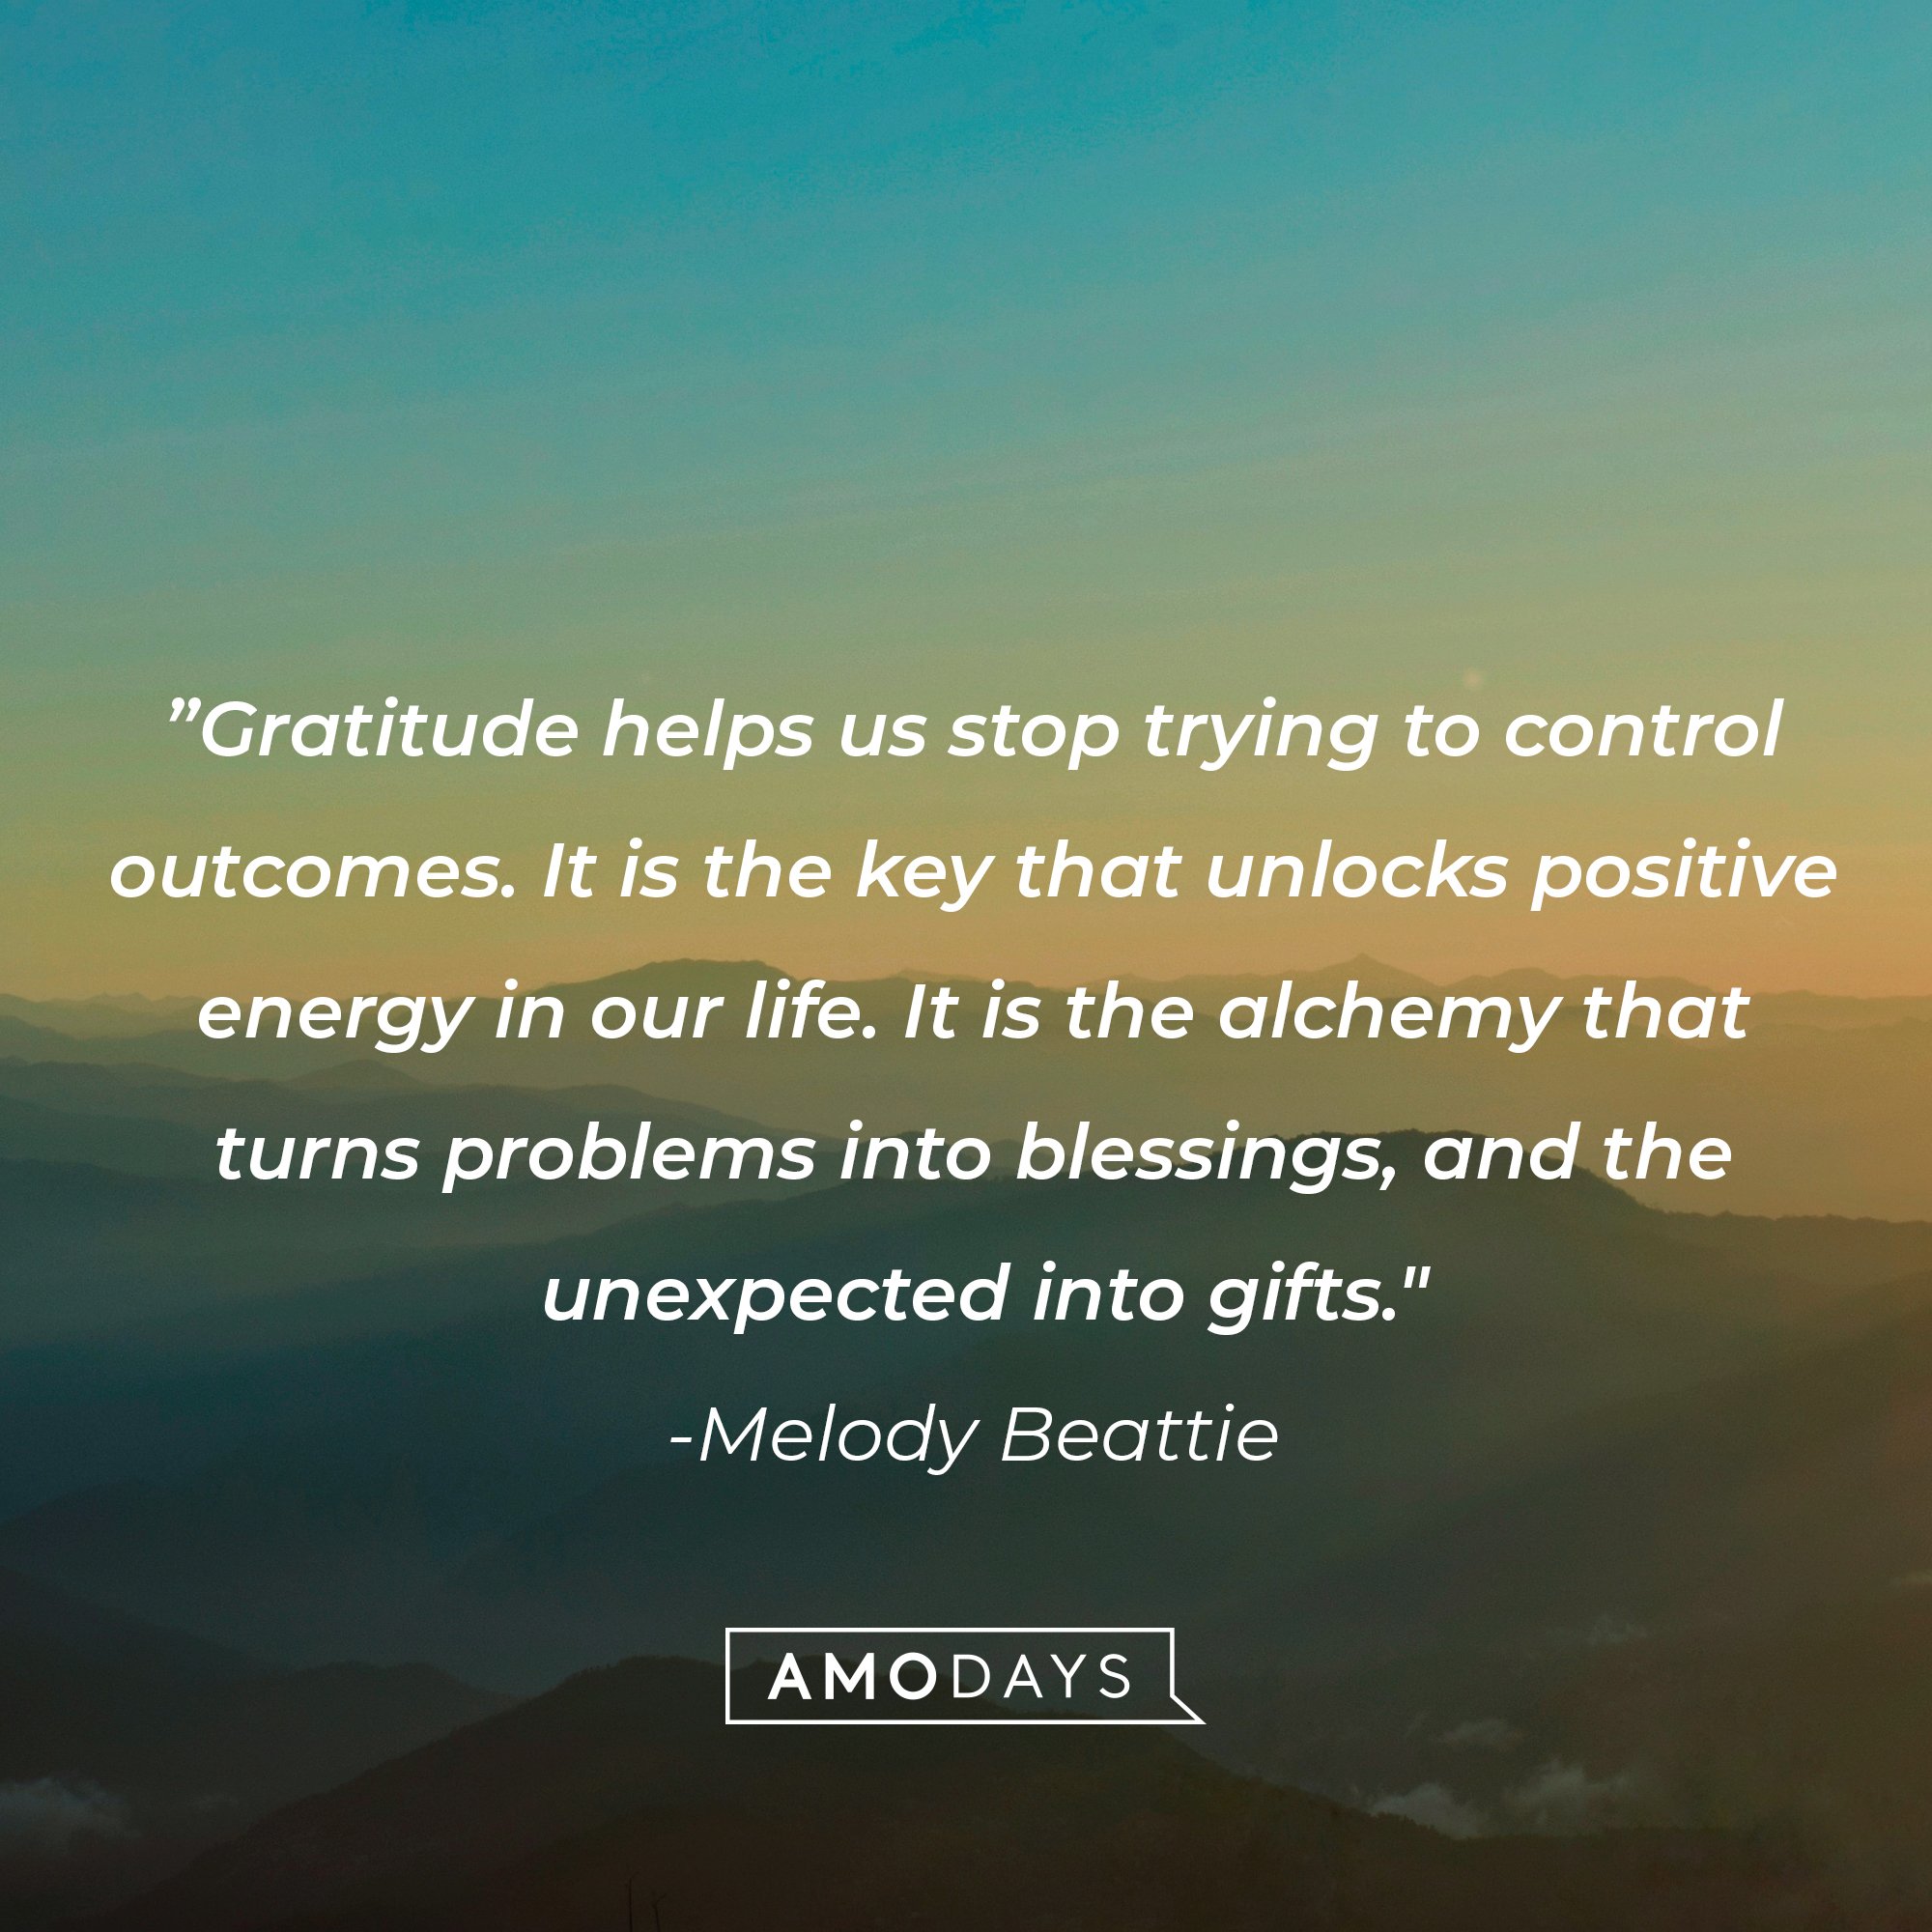 Melody Beattie’s quote: ”Gratitude helps us stop trying to control outcomes. It is the key that unlocks positive energy in our life. It is the alchemy that turns problems into blessings, and the unexpected into gifts." | Image: AmoDays   